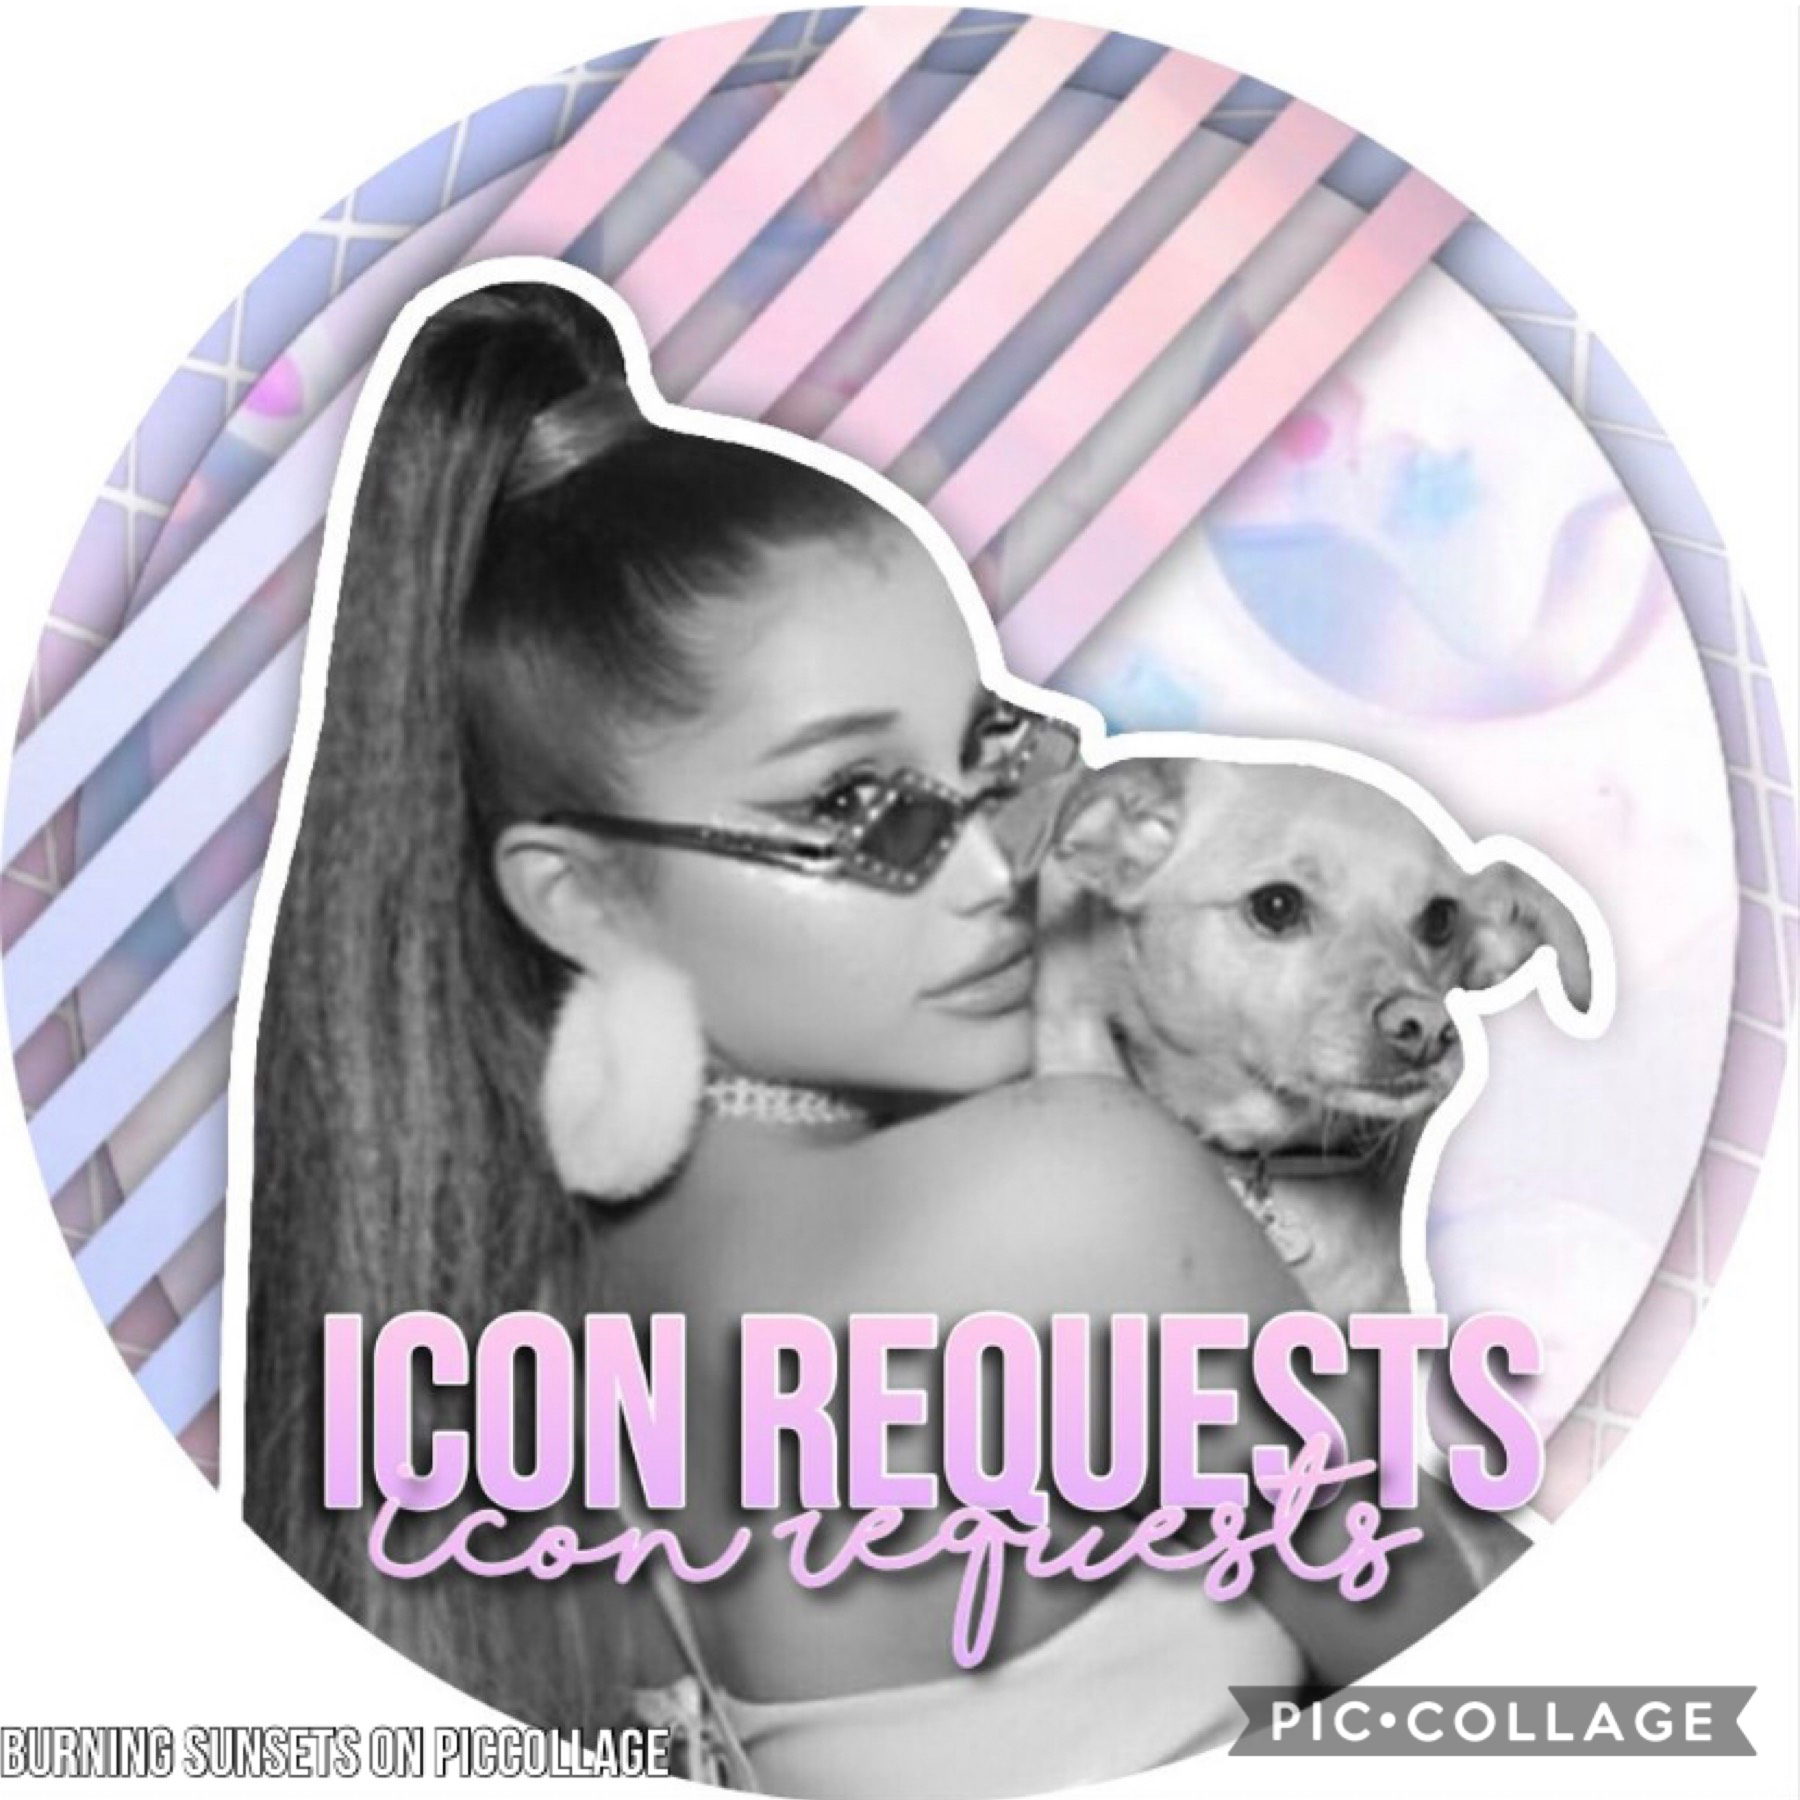 『 𝐎𝐩𝐞𝐧 𝐌𝐞 』
Icon Requests are open!
If you want an icon comment:
•who your idol is 
•what colors you want your icon
•what you want your icon to say (preferably your username) 
𝐭𝐡𝐚𝐧𝐤𝐬 𝐥𝐨𝐯𝐞𝐬 ✭˚･ﾟ✧*･ﾟ*✭˚･ﾟ✧*･ﾟ*